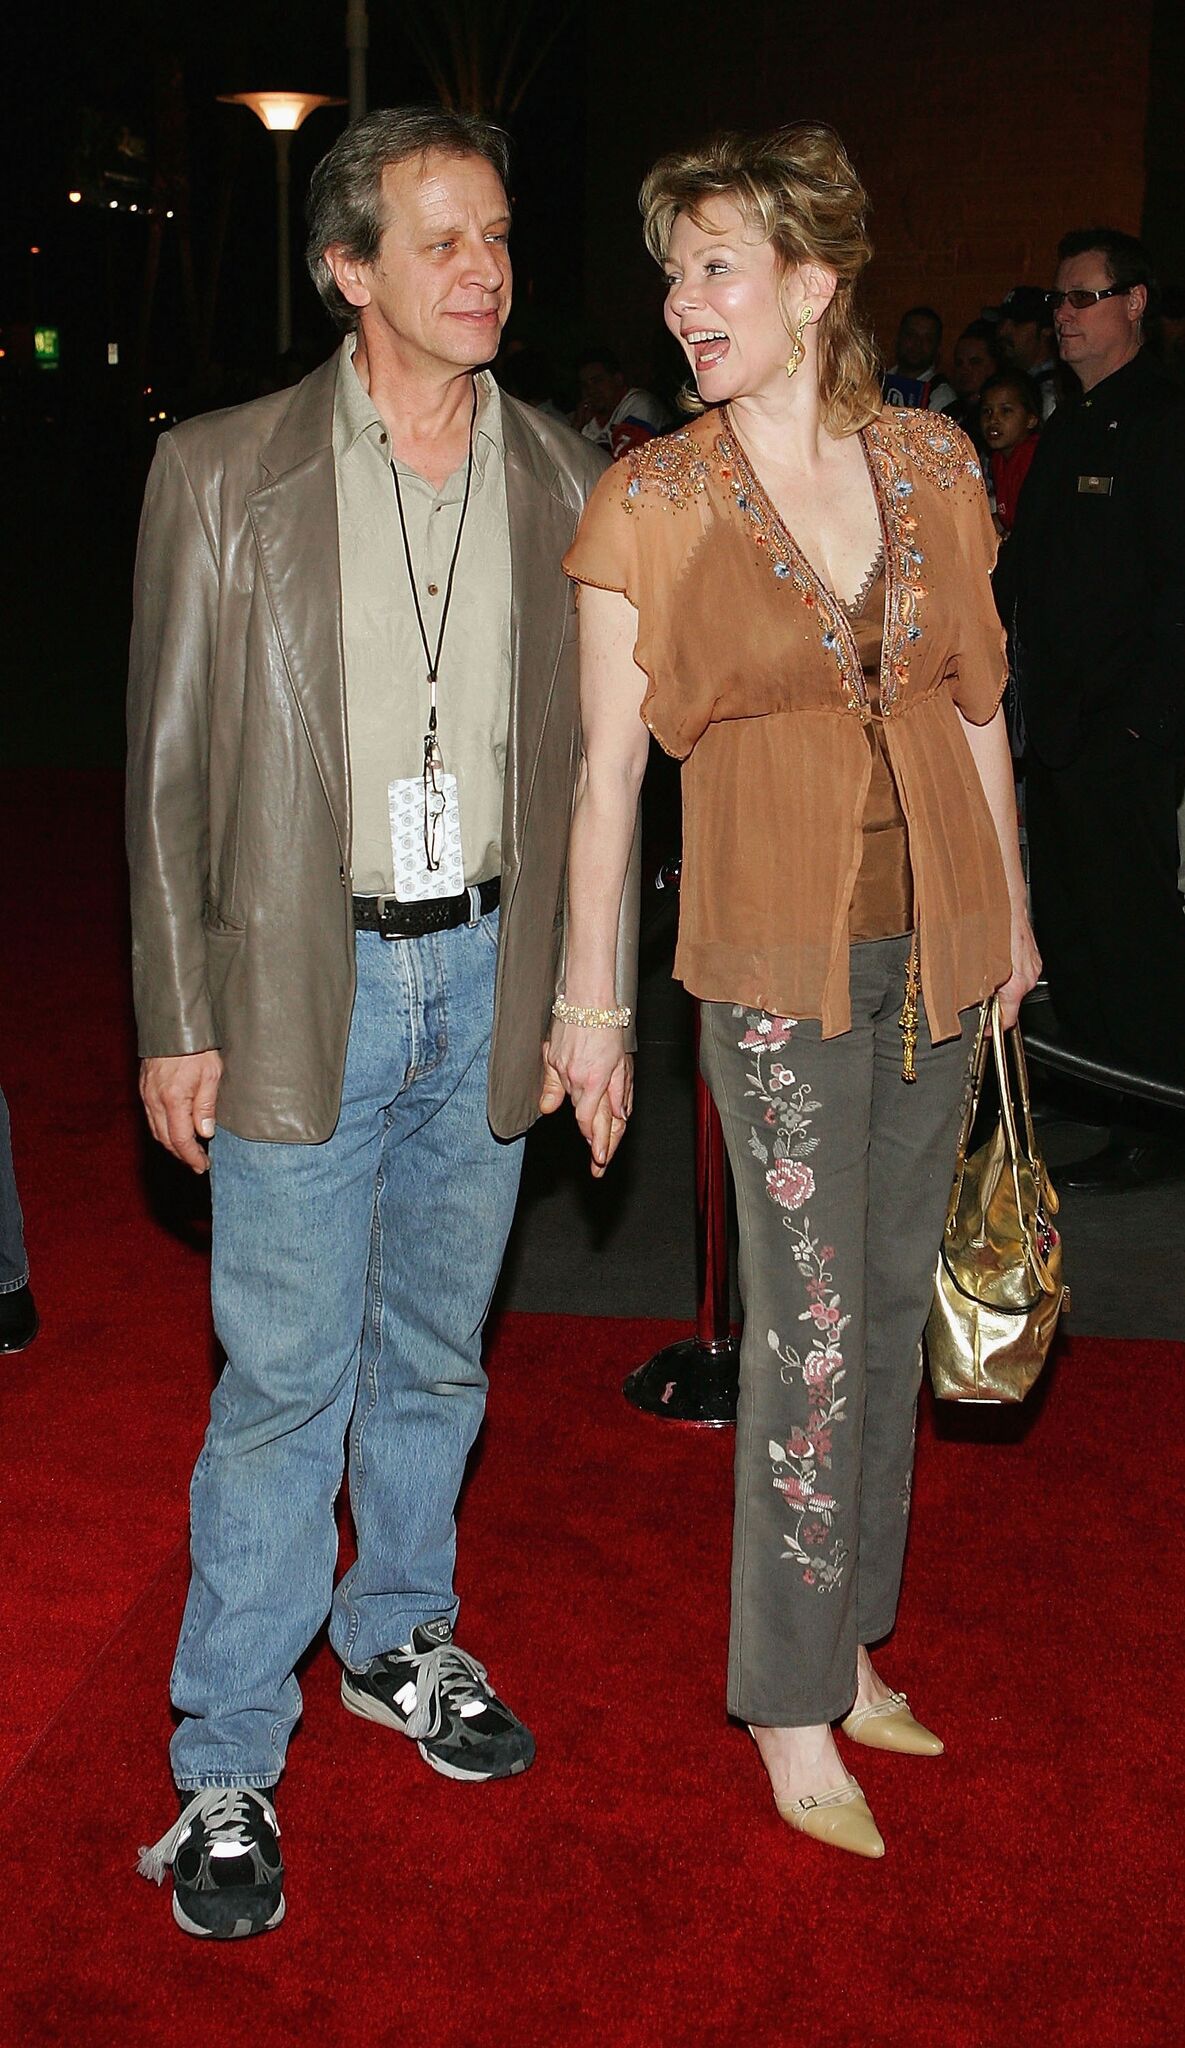  Richard Gilliland and actress Jean Smart arrive at the Legends Celebrity Invitational Charity Poker Tournament in 2006. | Source: Getty Images